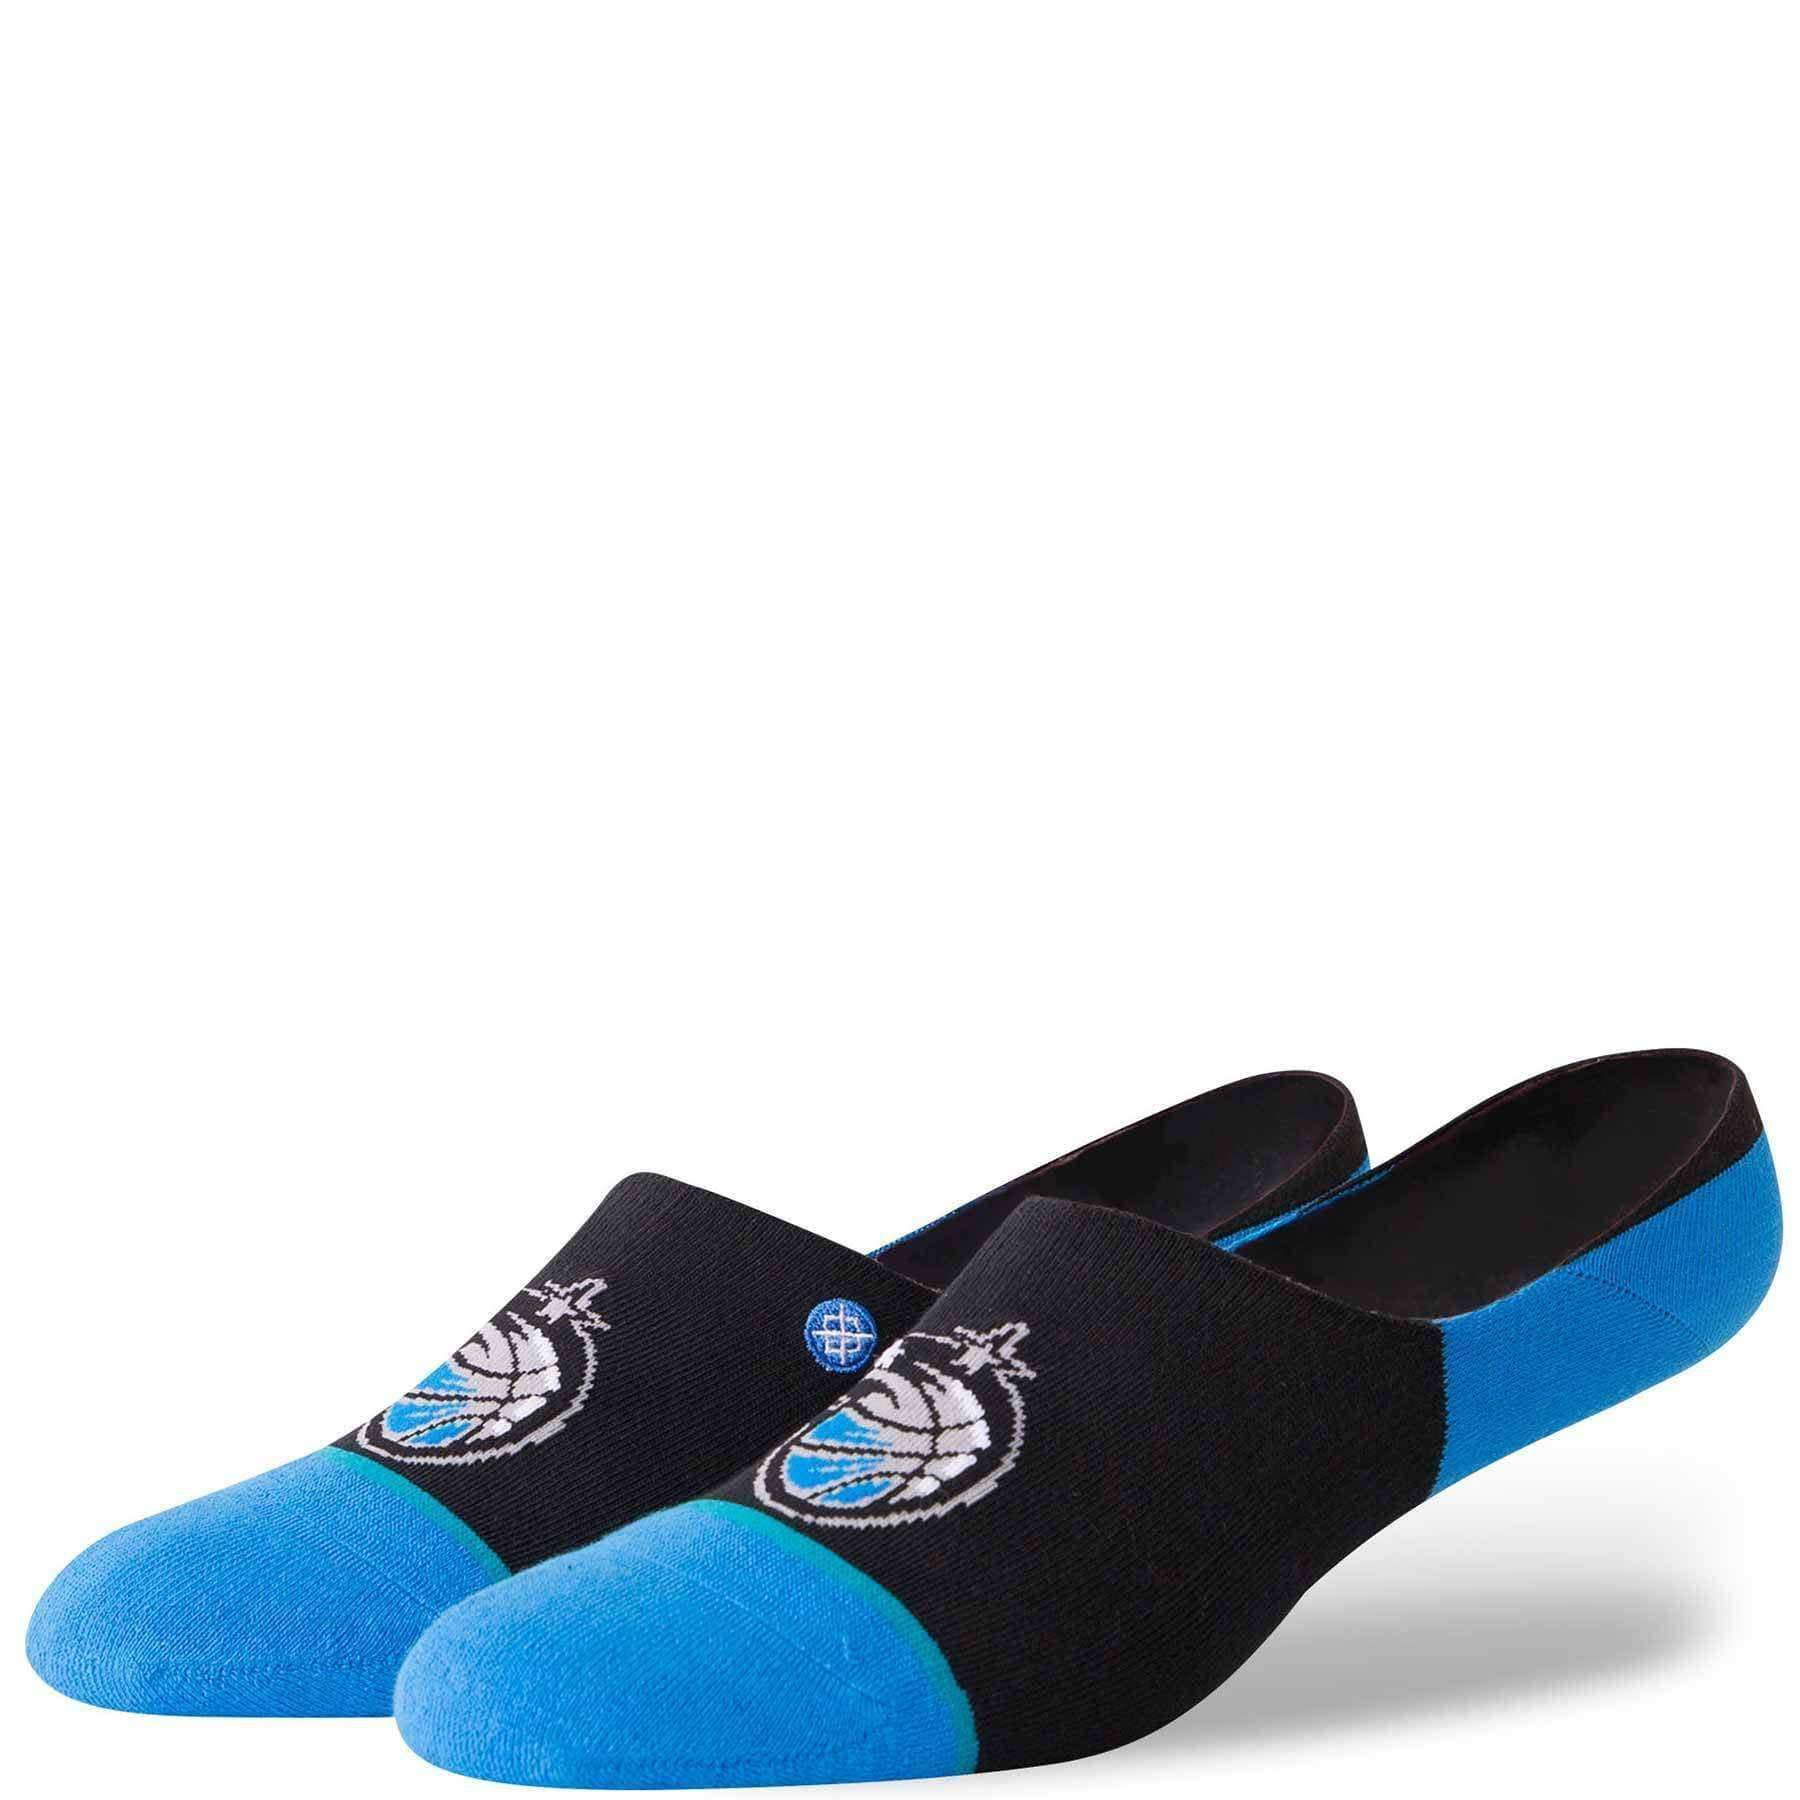 Stance NBA Arena Magic Invisible Low Socks Mens Low/Ankle Socks by Stance